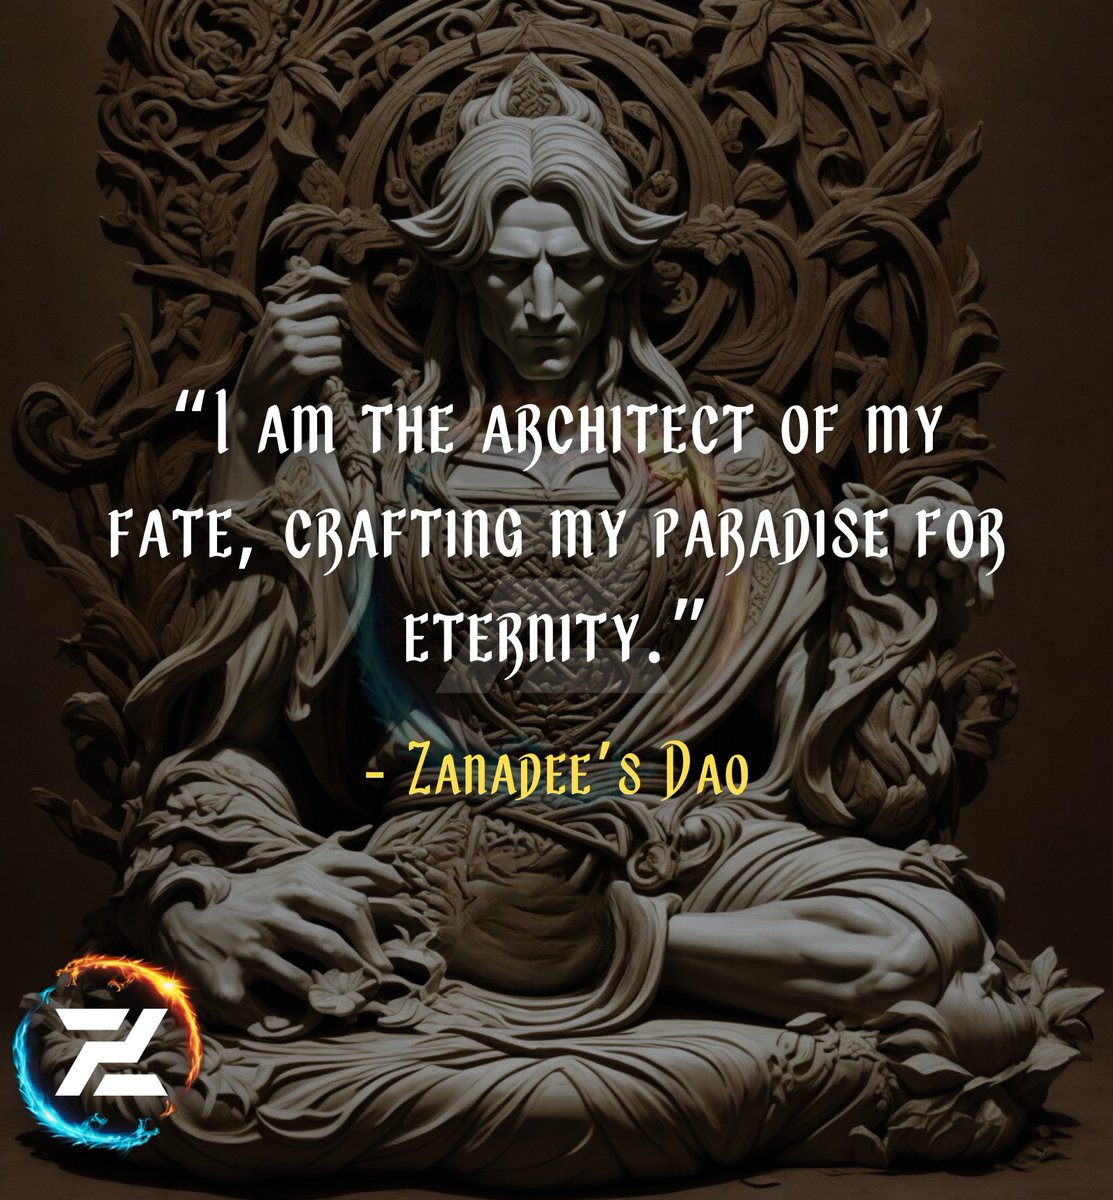 Architect of Eternity

“I am the architect of my fate, crafting my paradise for eternity.”

#PersonalGrowth #SelfEmpowerment #LifeChoices #CreateYourReality #SpiritualJourney

Zanadee’s Dao